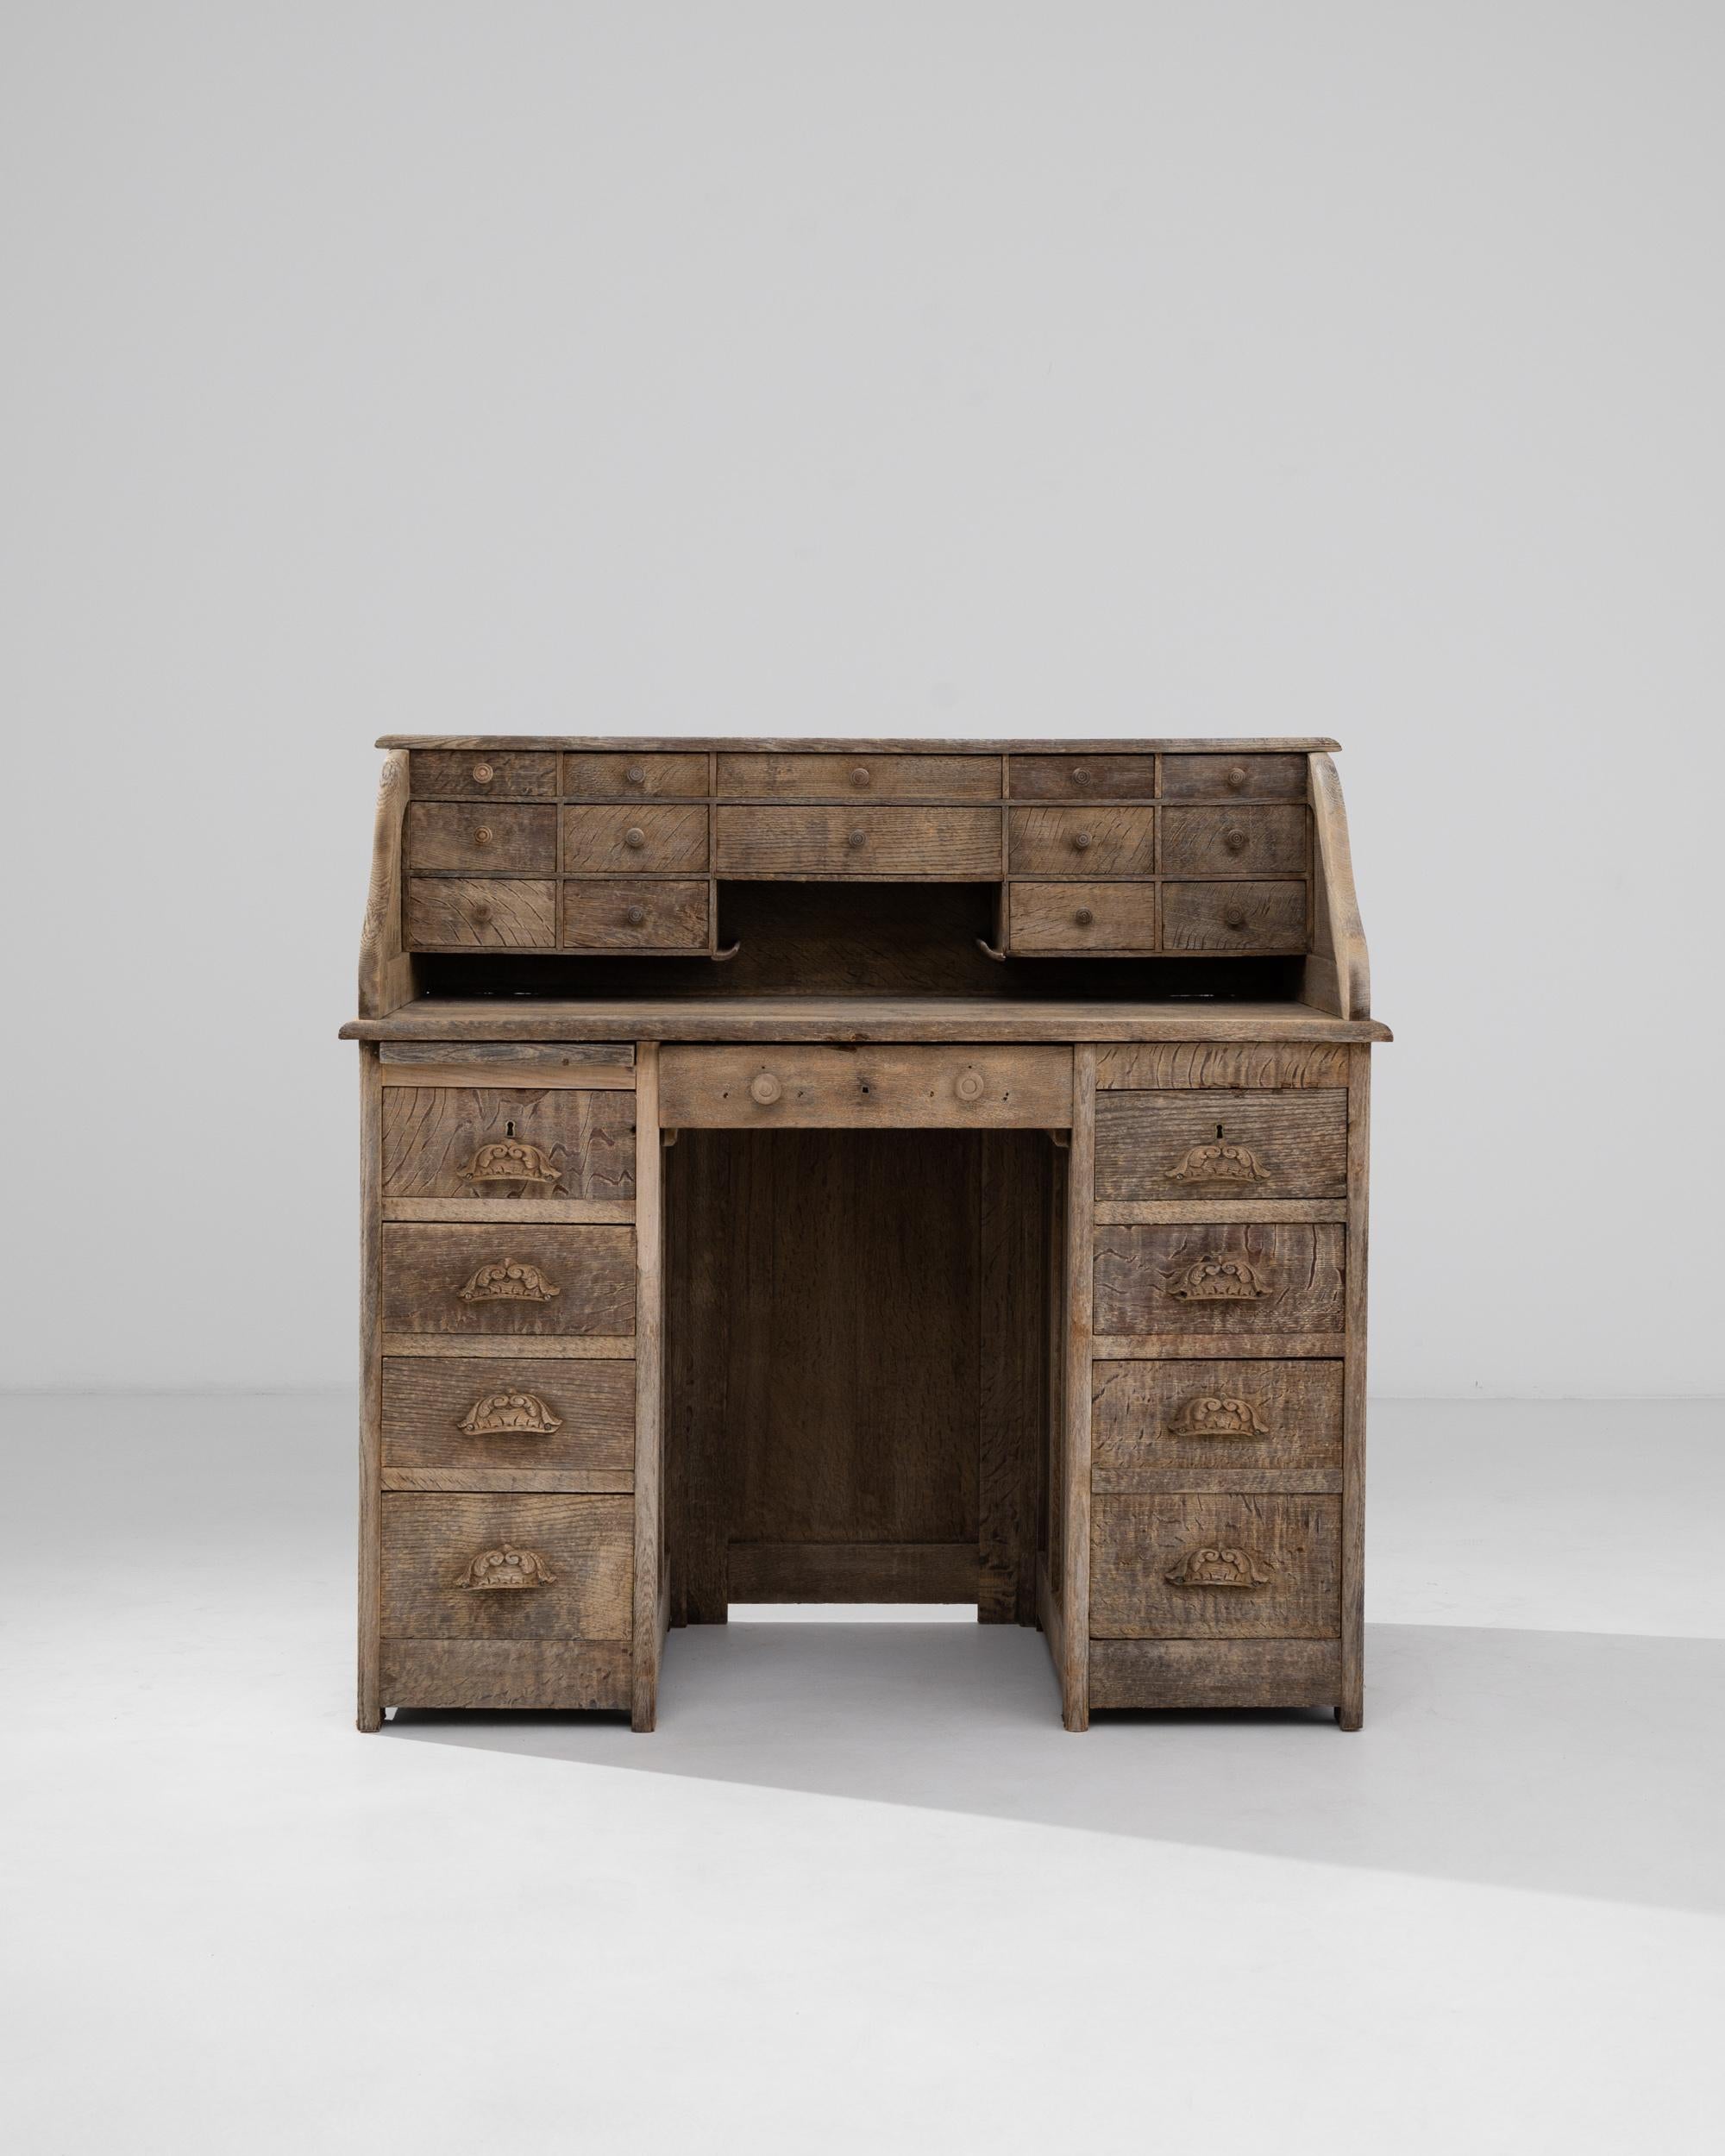 This oak escritoire offers a secluded workspace. Built in France circa 1910, contoured partitions shield the desktop, creating a bubble of privacy ideal for personal correspondence and focused thought. Above the tabletop, an array of small drawers